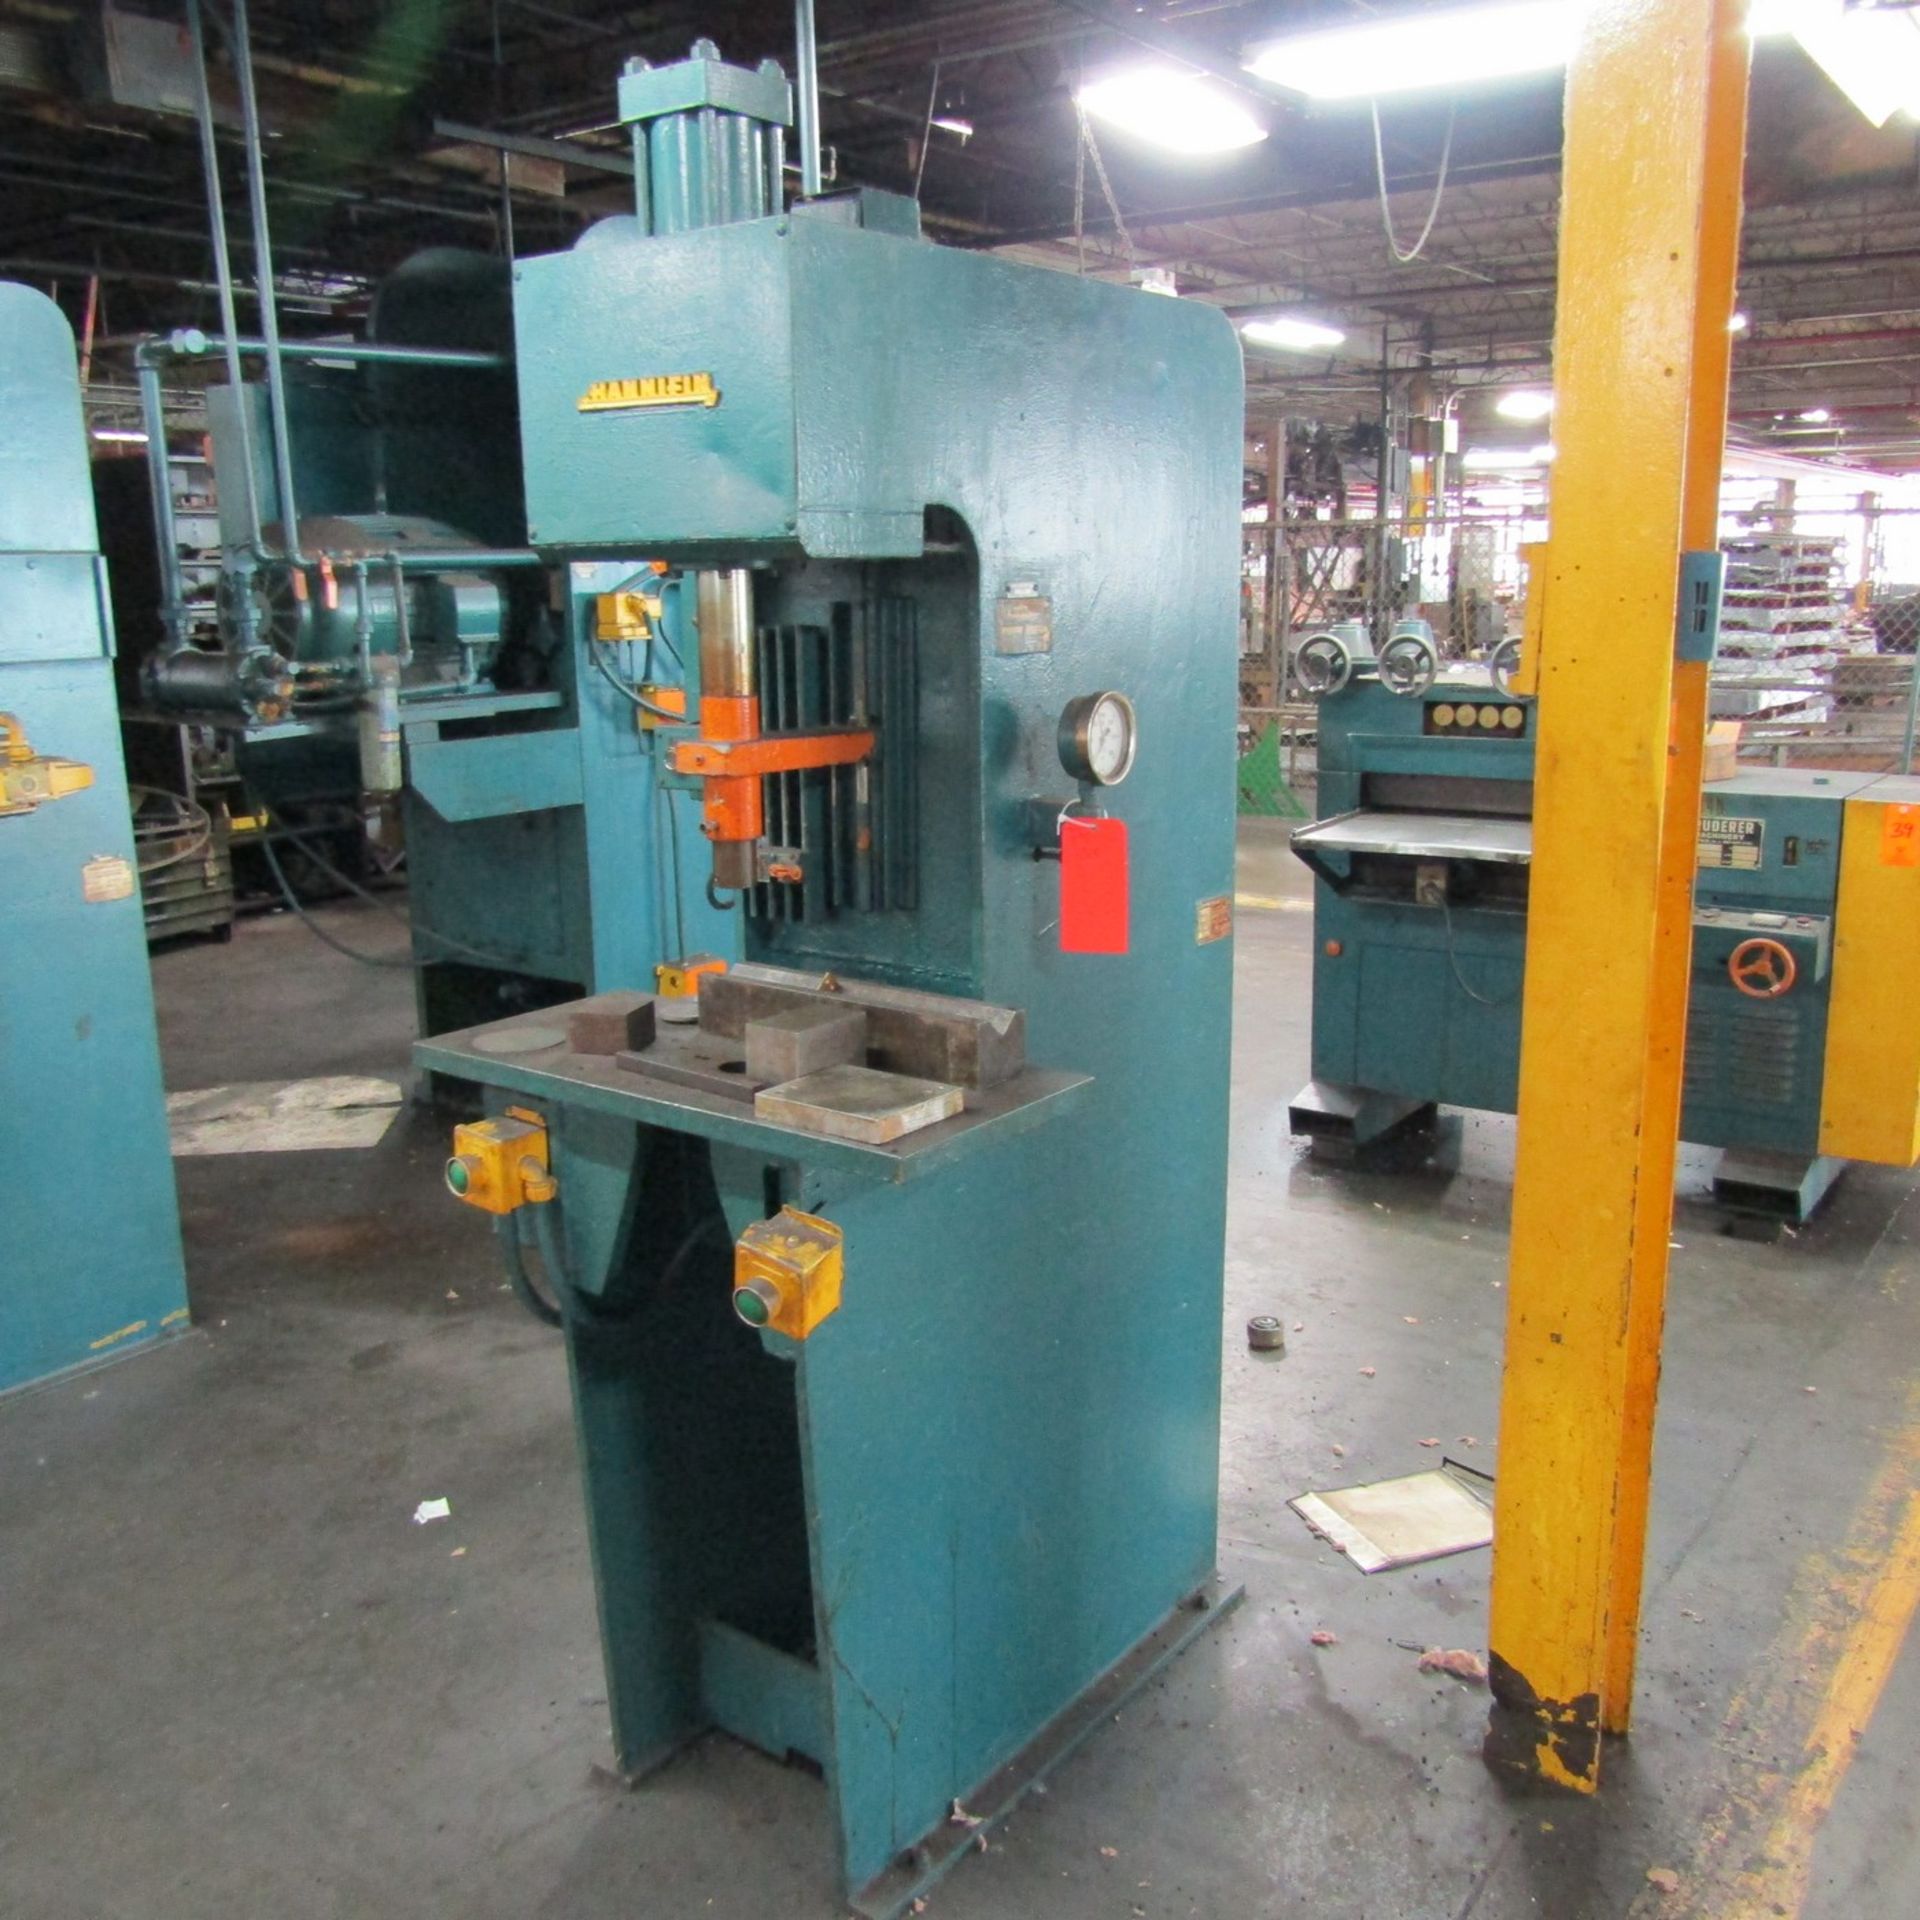 Hannifin 8-Ton Cap. Model F 21-41-M Hydraulic Press, S/N: E 37373-4; Rated at 3,000-PSI, Palm - Image 5 of 6